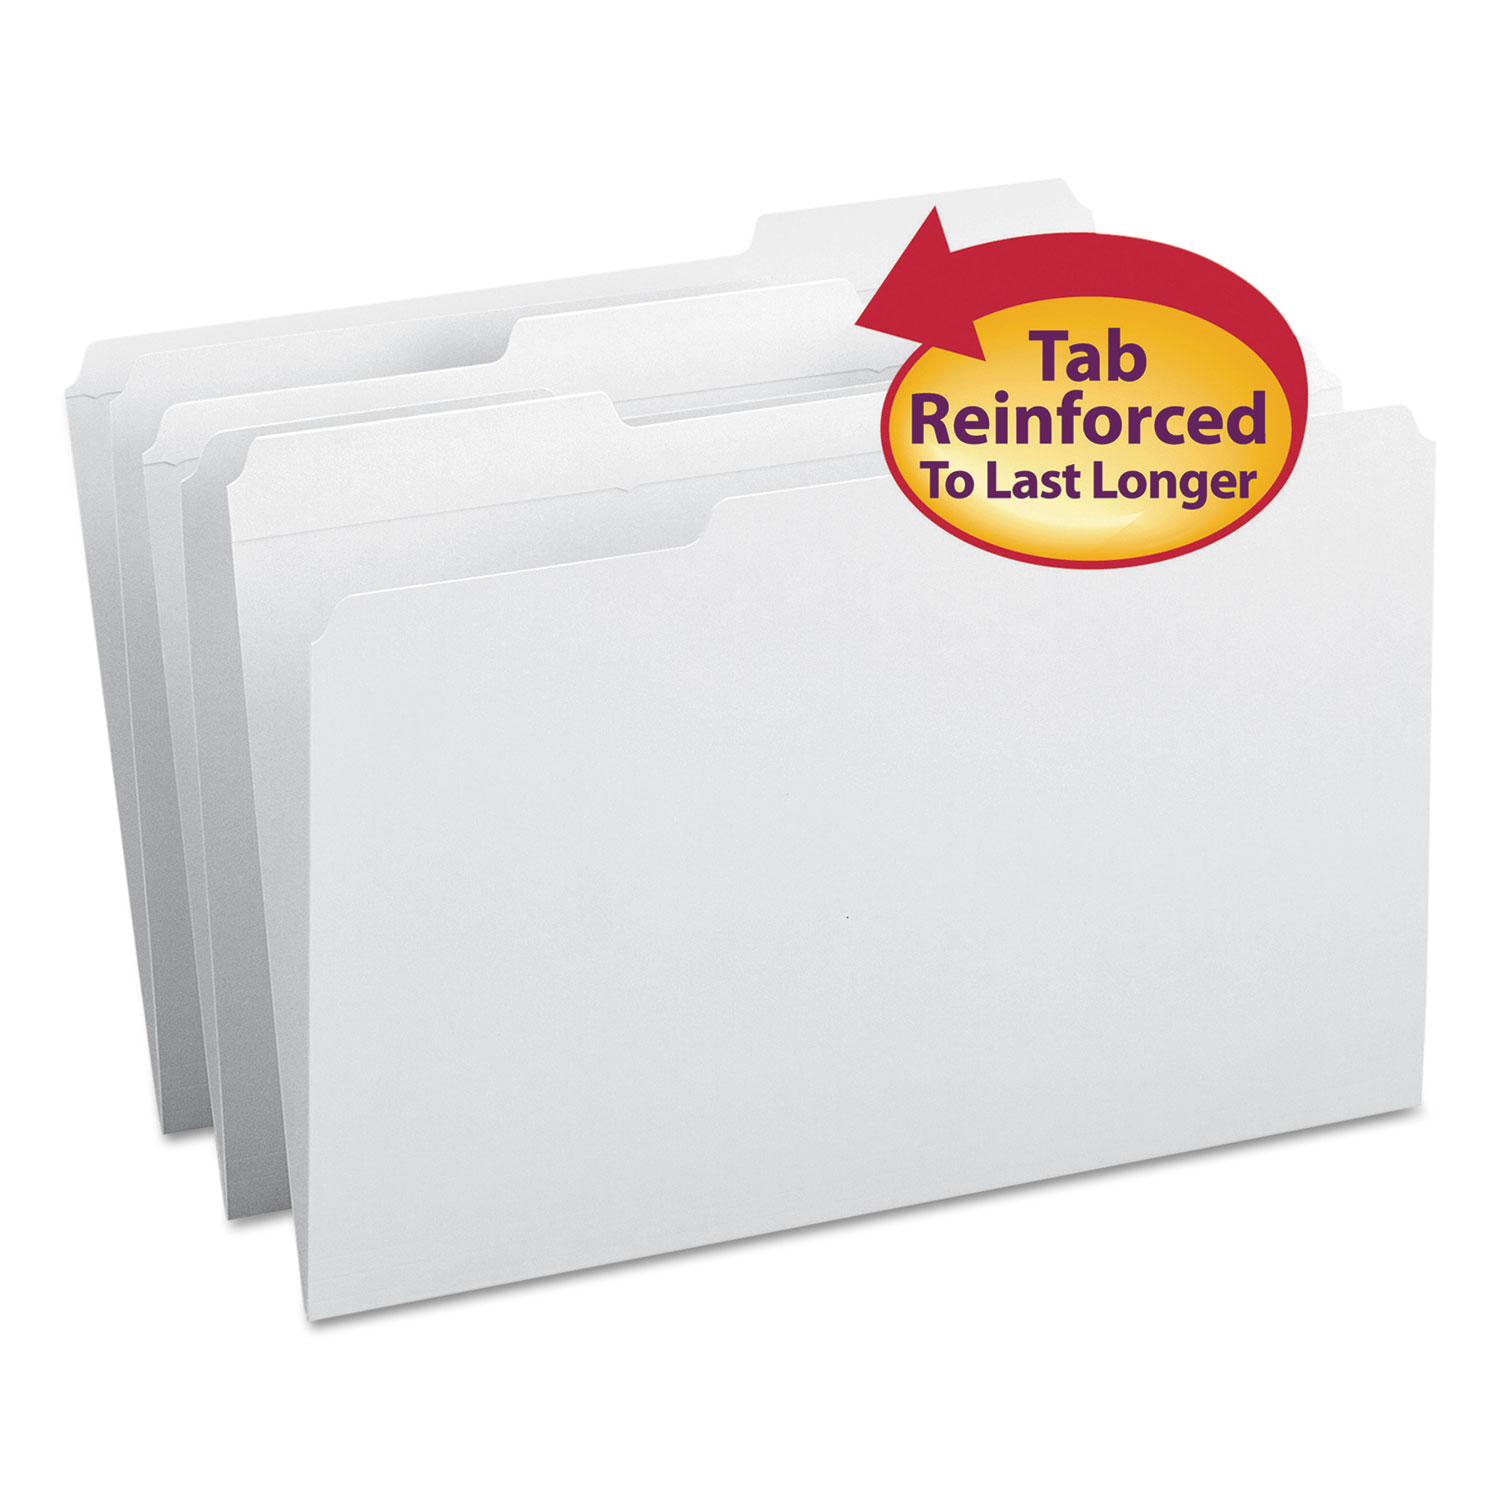  Smead 17834 Reinforced Top Tab Colored File Folders, 1/3-Cut Tabs, Legal Size, White, 100/Box (SMD17834) 